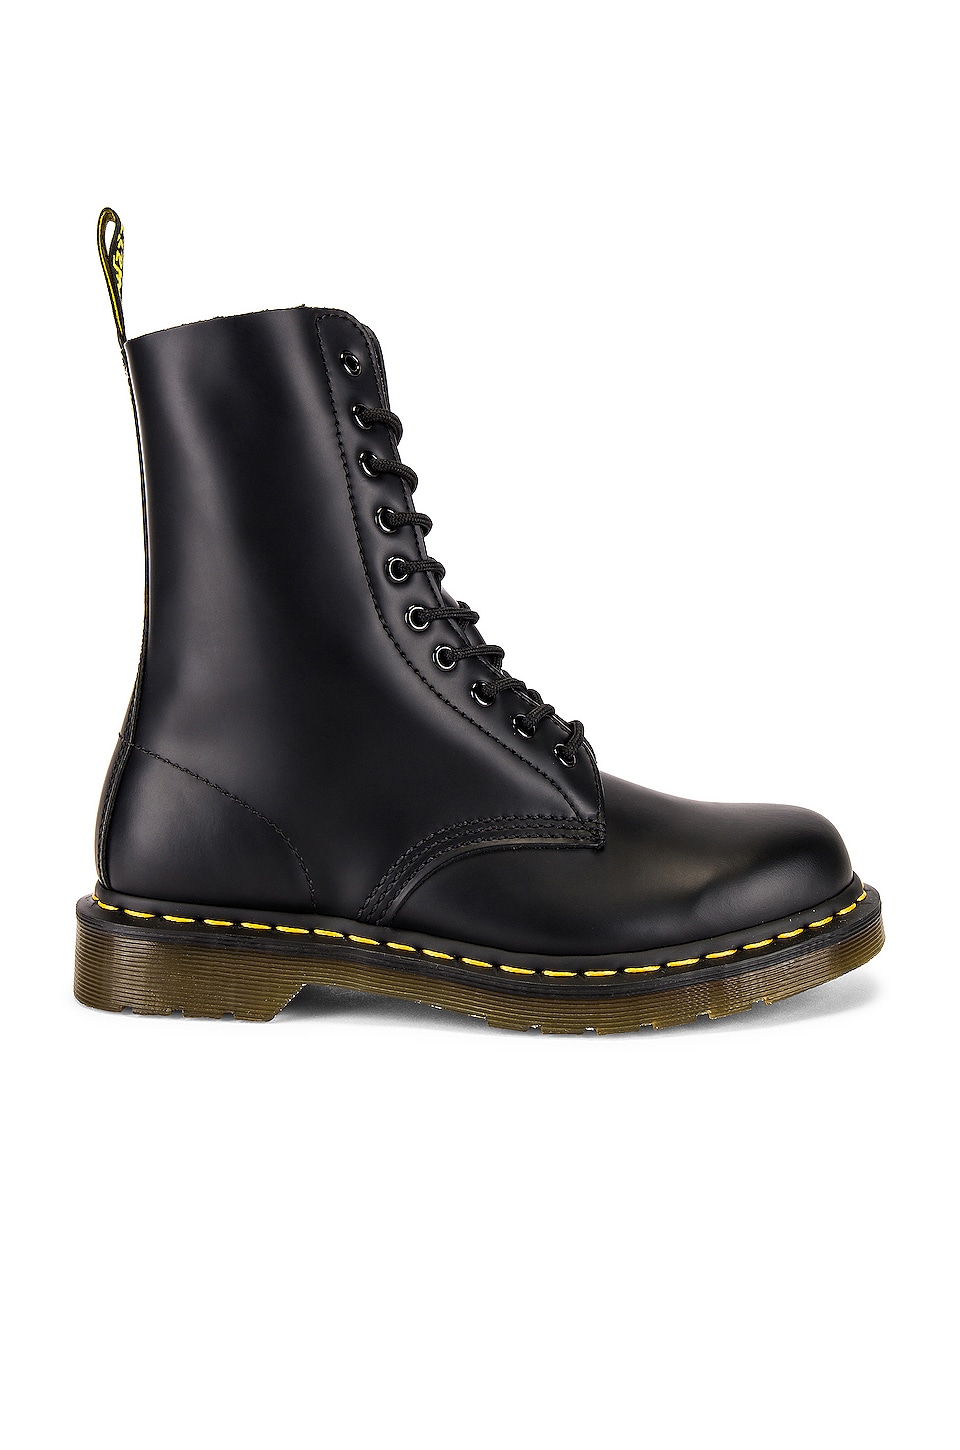 Dr. Martens 1490 Smooth Boots Black